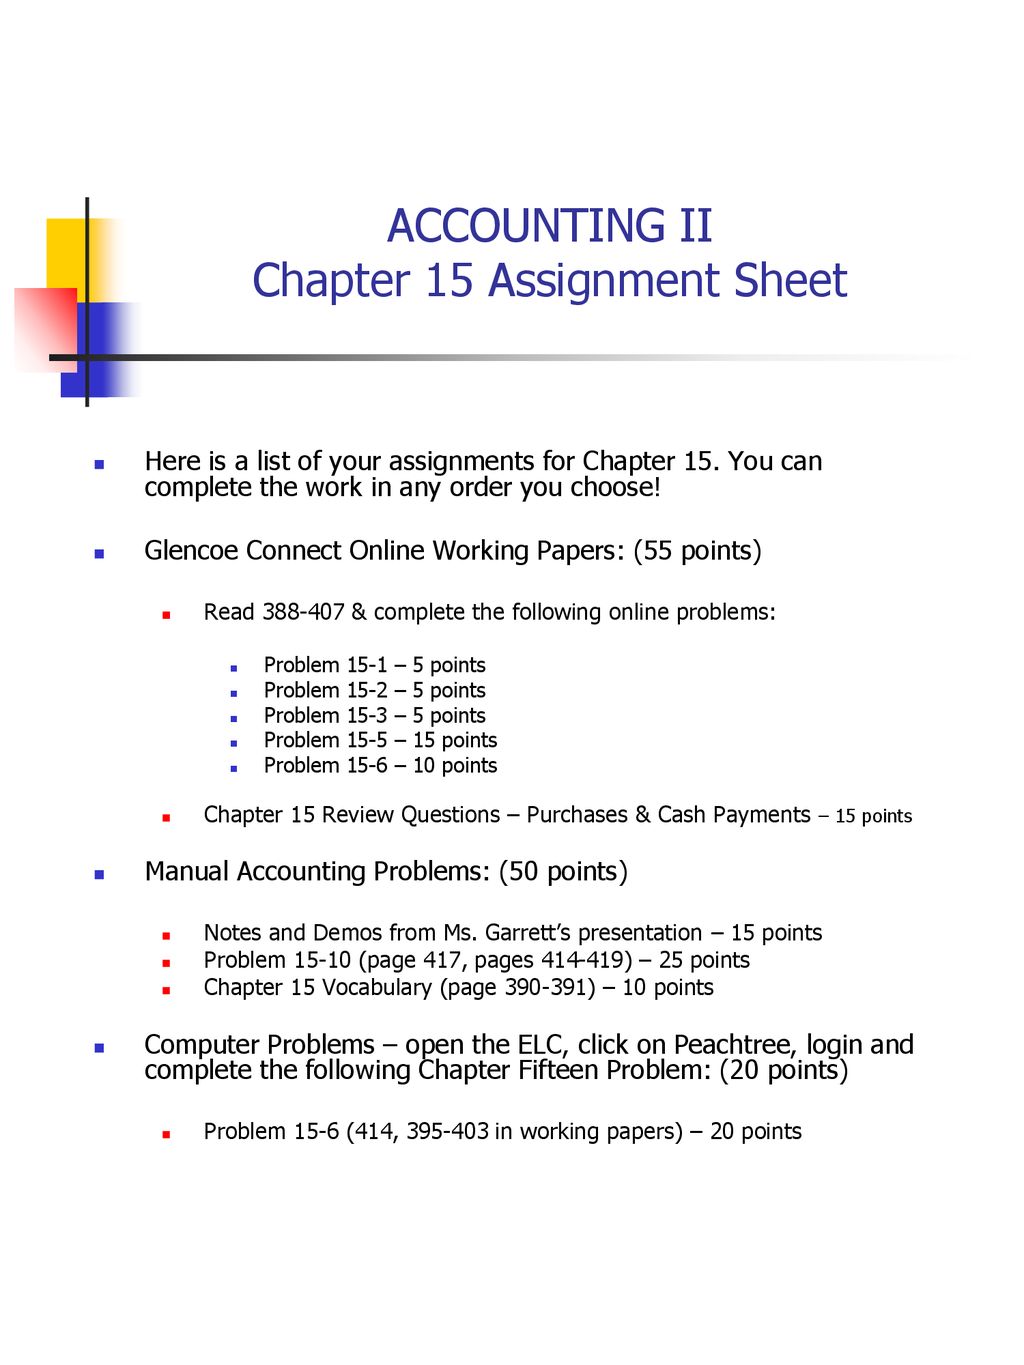 ACCOUNTING II Chapter 15 Assignment Sheet